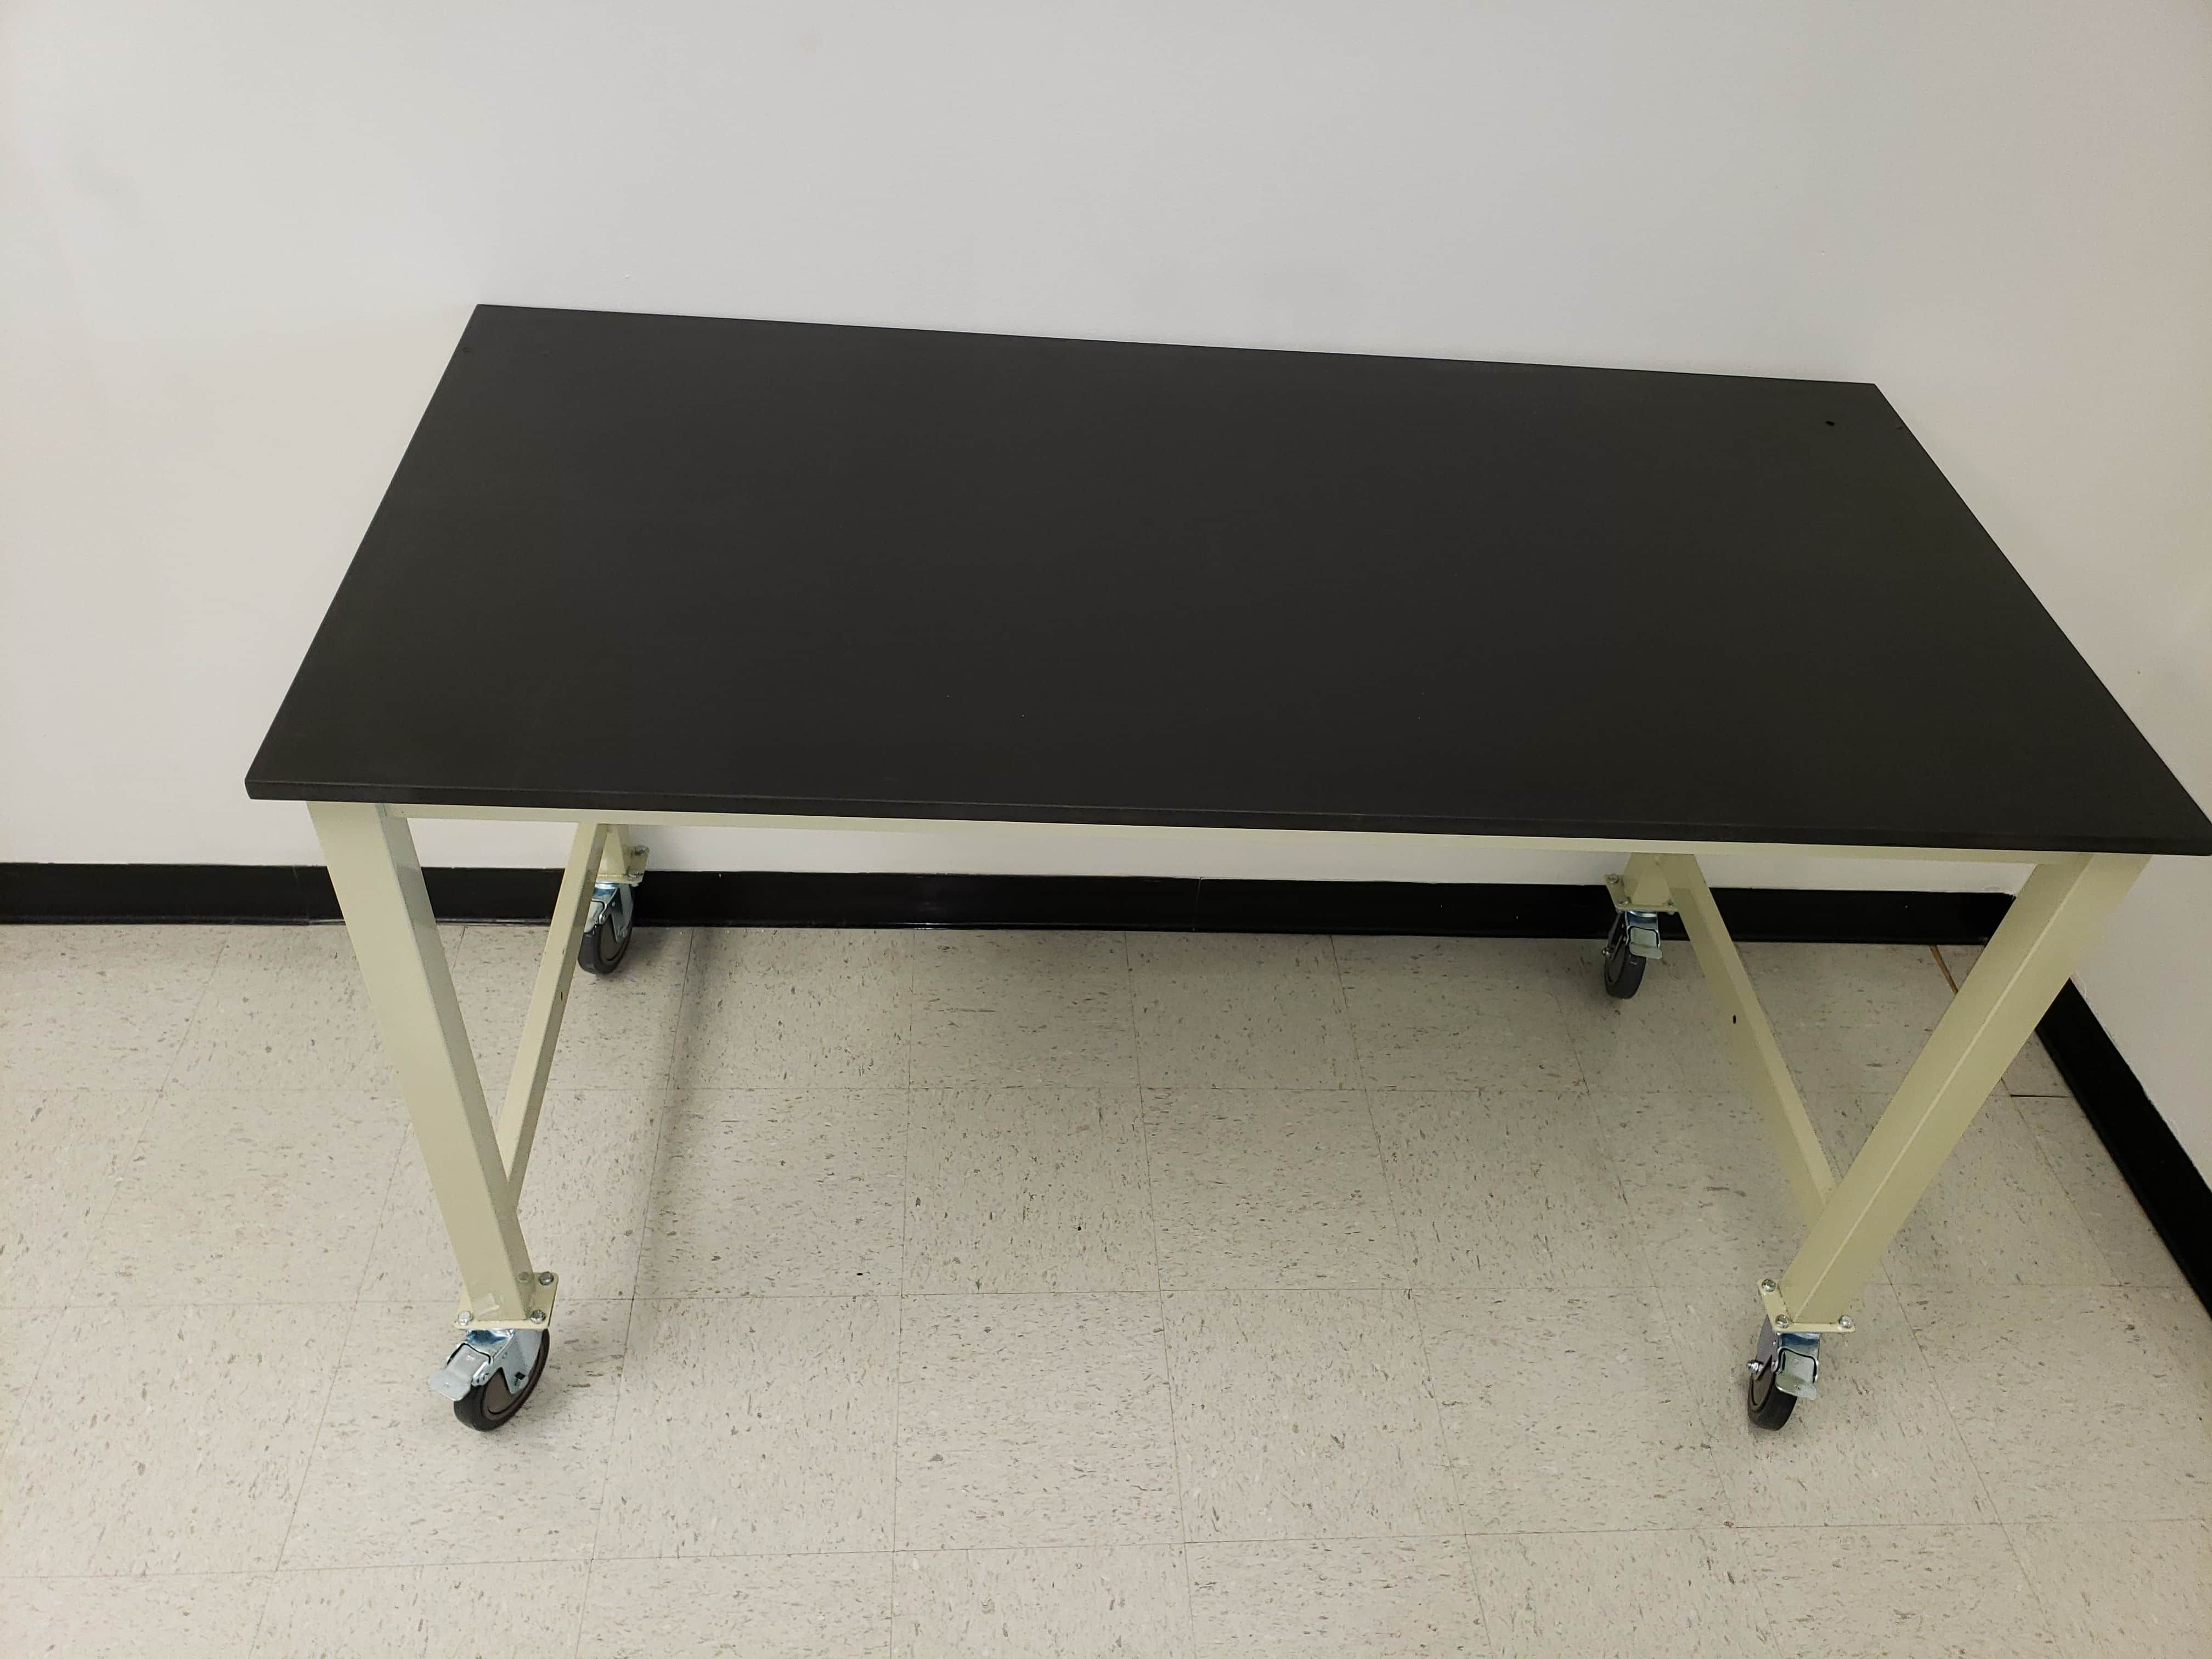 4 foot adjustable lab table (48" long x 30" deep) with phenolic resin countertop (NEW)